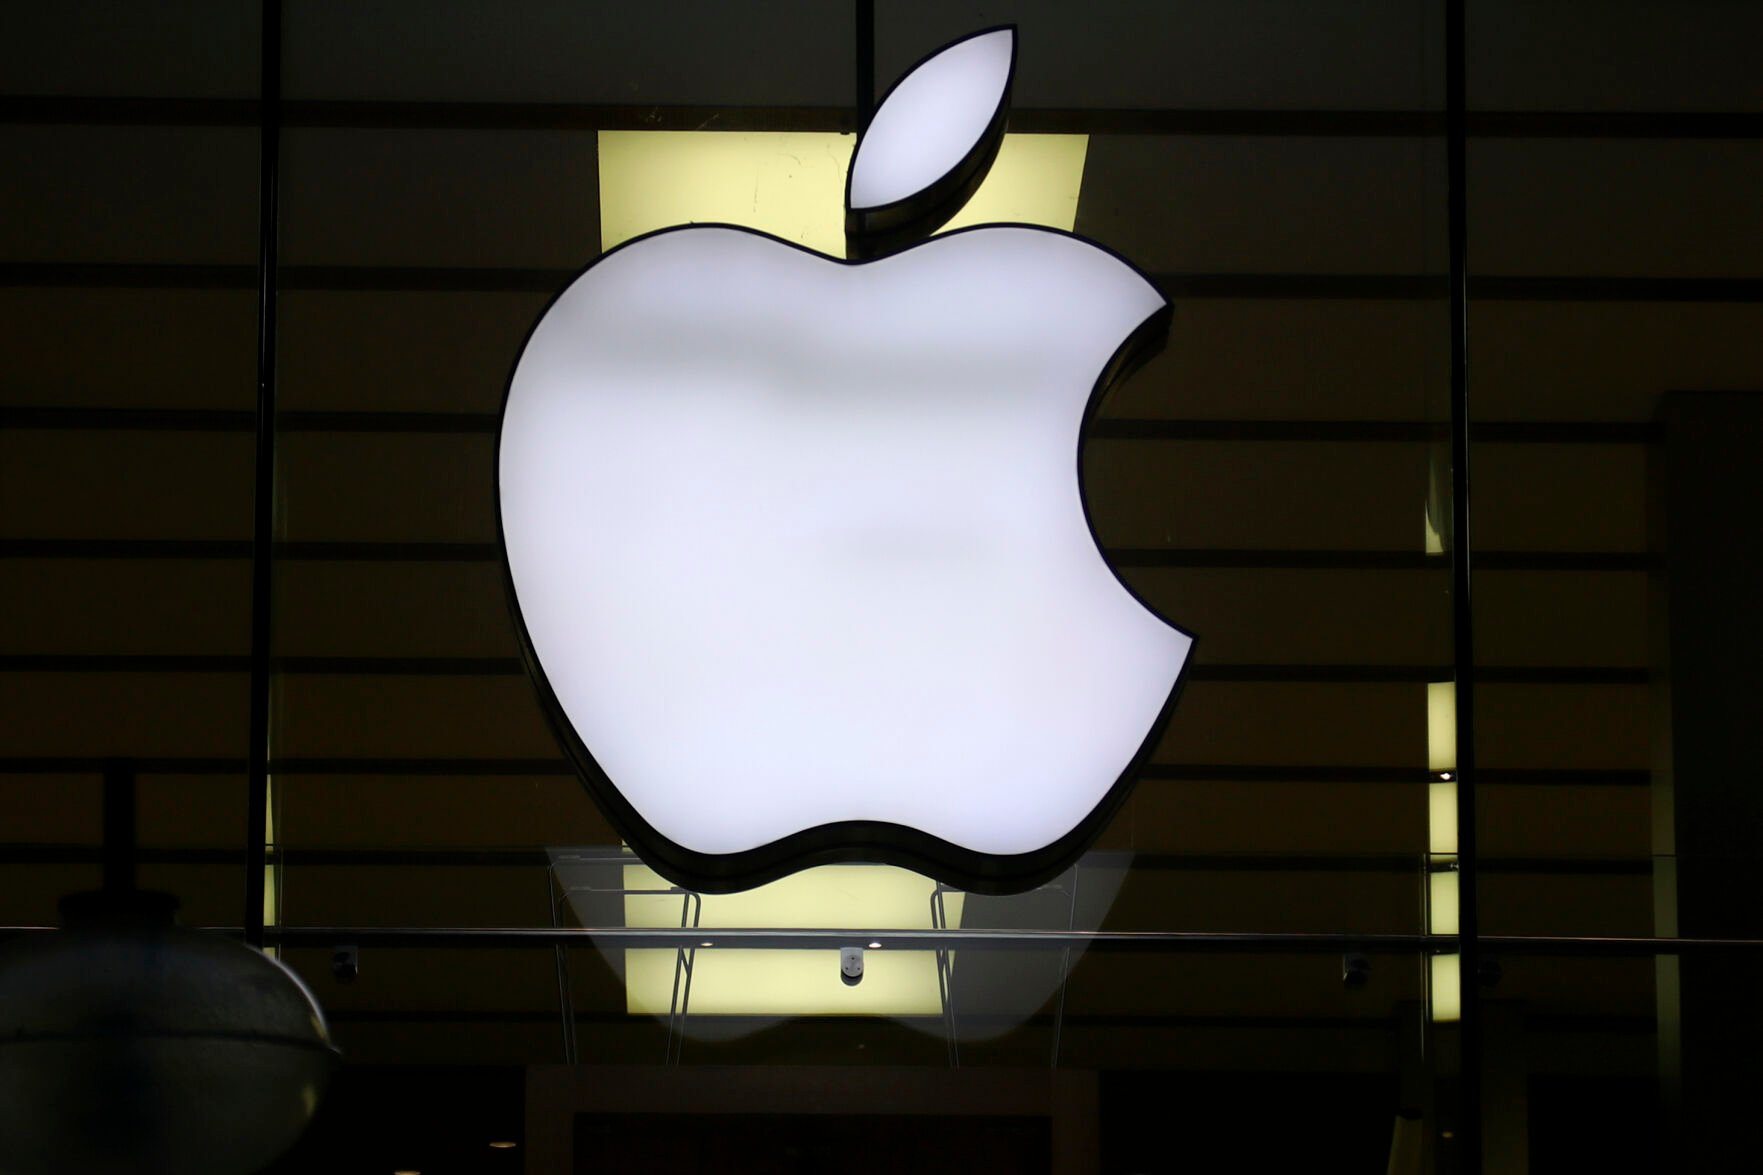 <p>FILE - The Apple logo is illuminated at a store in the city center in Munich, Germany, on Dec. 16, 2020. Apple Corp. shares have been sliding, Friday, Sept. 8, 2023 weighed down by news reports of an iPhone ban for Chinese state employees and a product launch next week overshadowed by slick new phones by rival Huawei. (AP Photo/Matthias Schrader, File)</p>   PHOTO CREDIT: Matthias Schrader - staff, ASSOCIATED PRESS